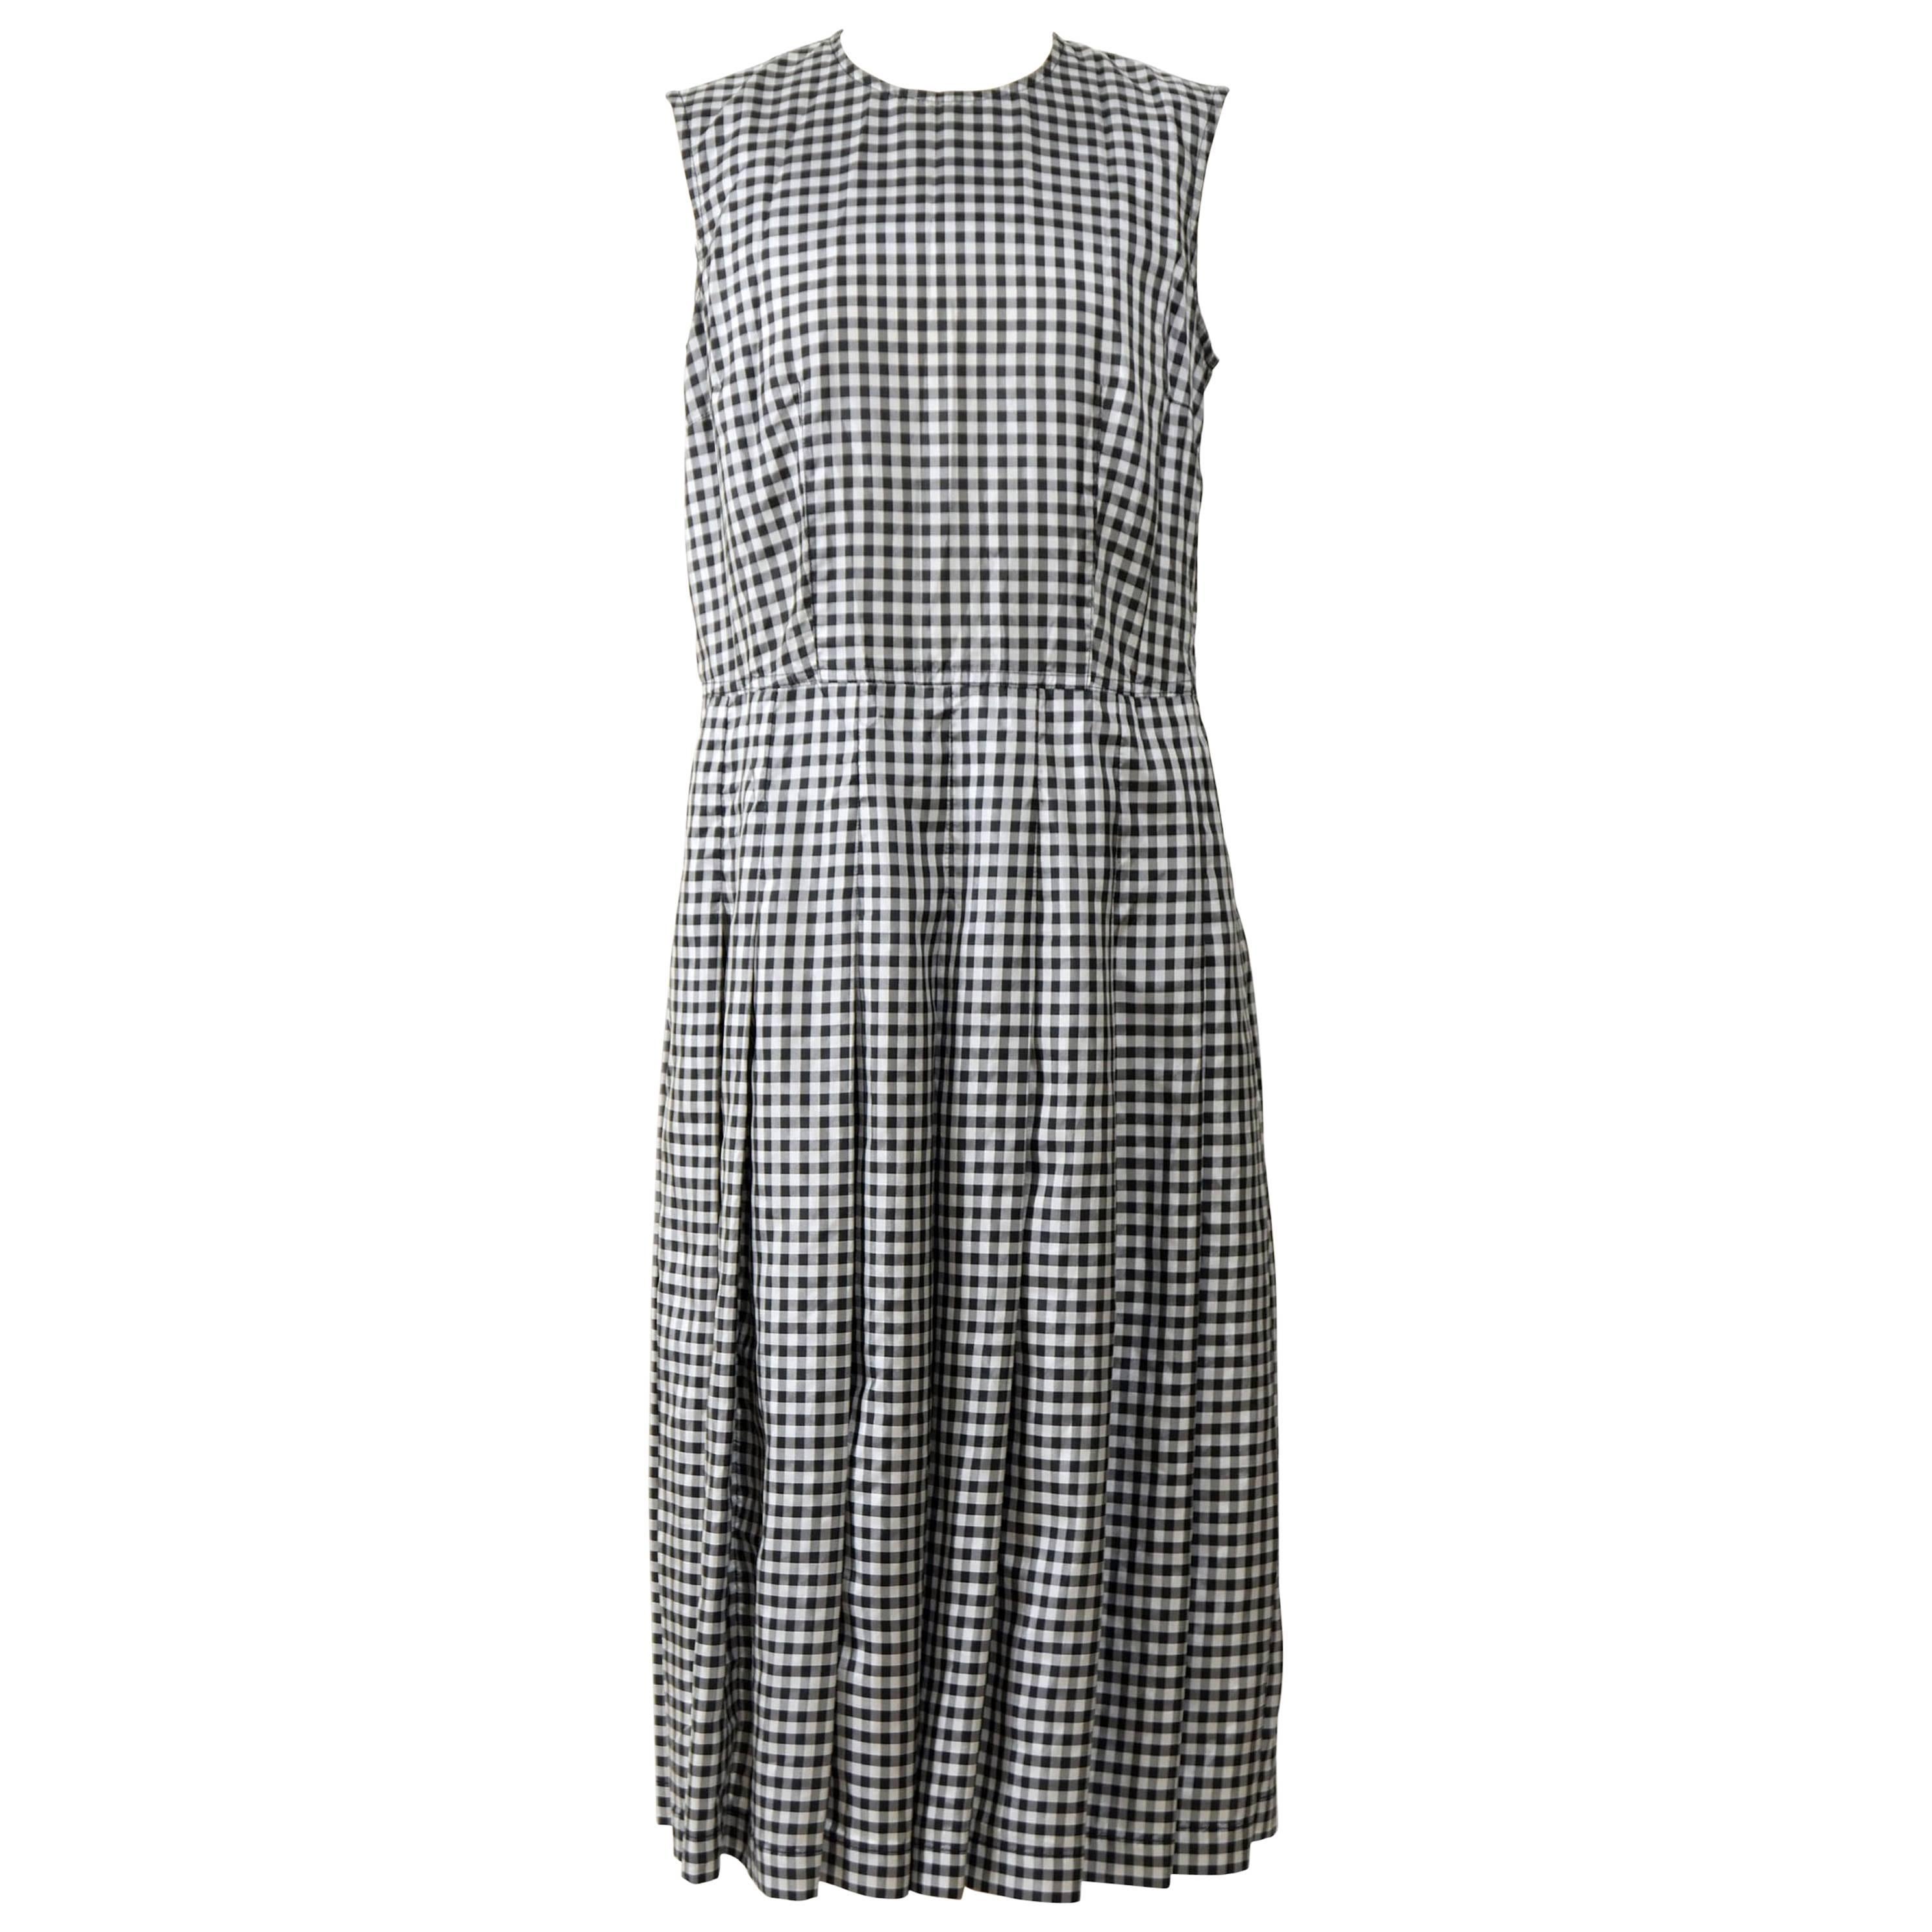 COMME des GARCONS Black and White Gingham Dress